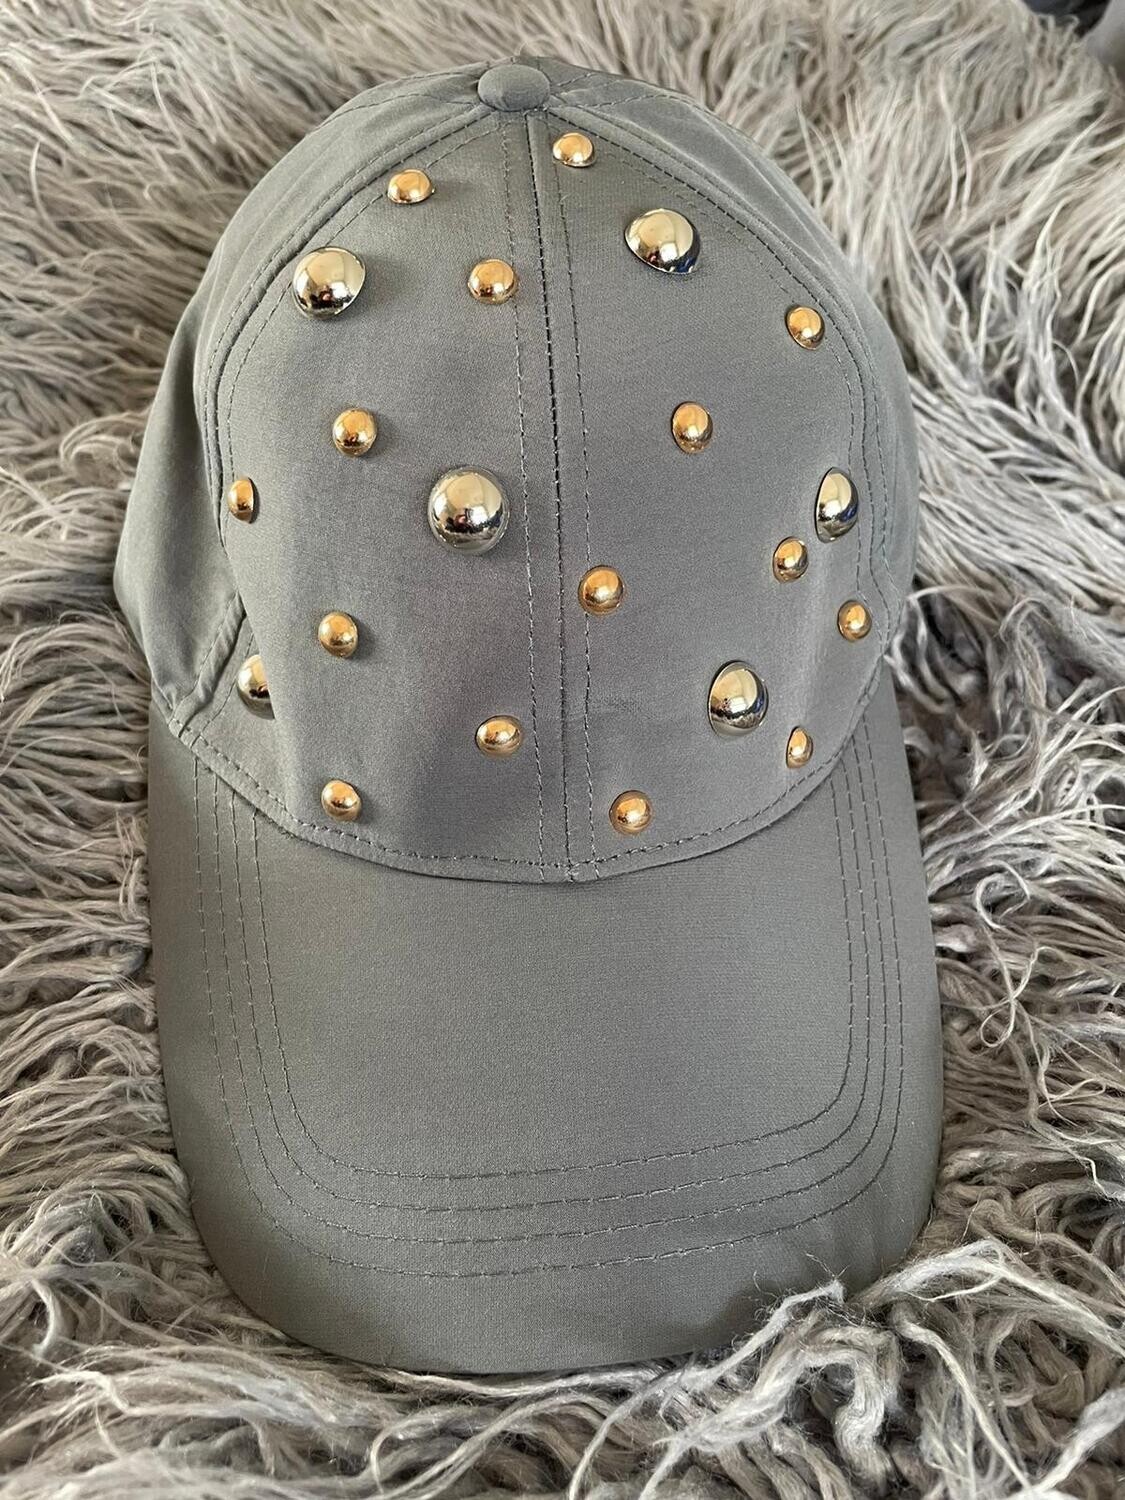 All glammed up - "sweat free" caps w/closed back